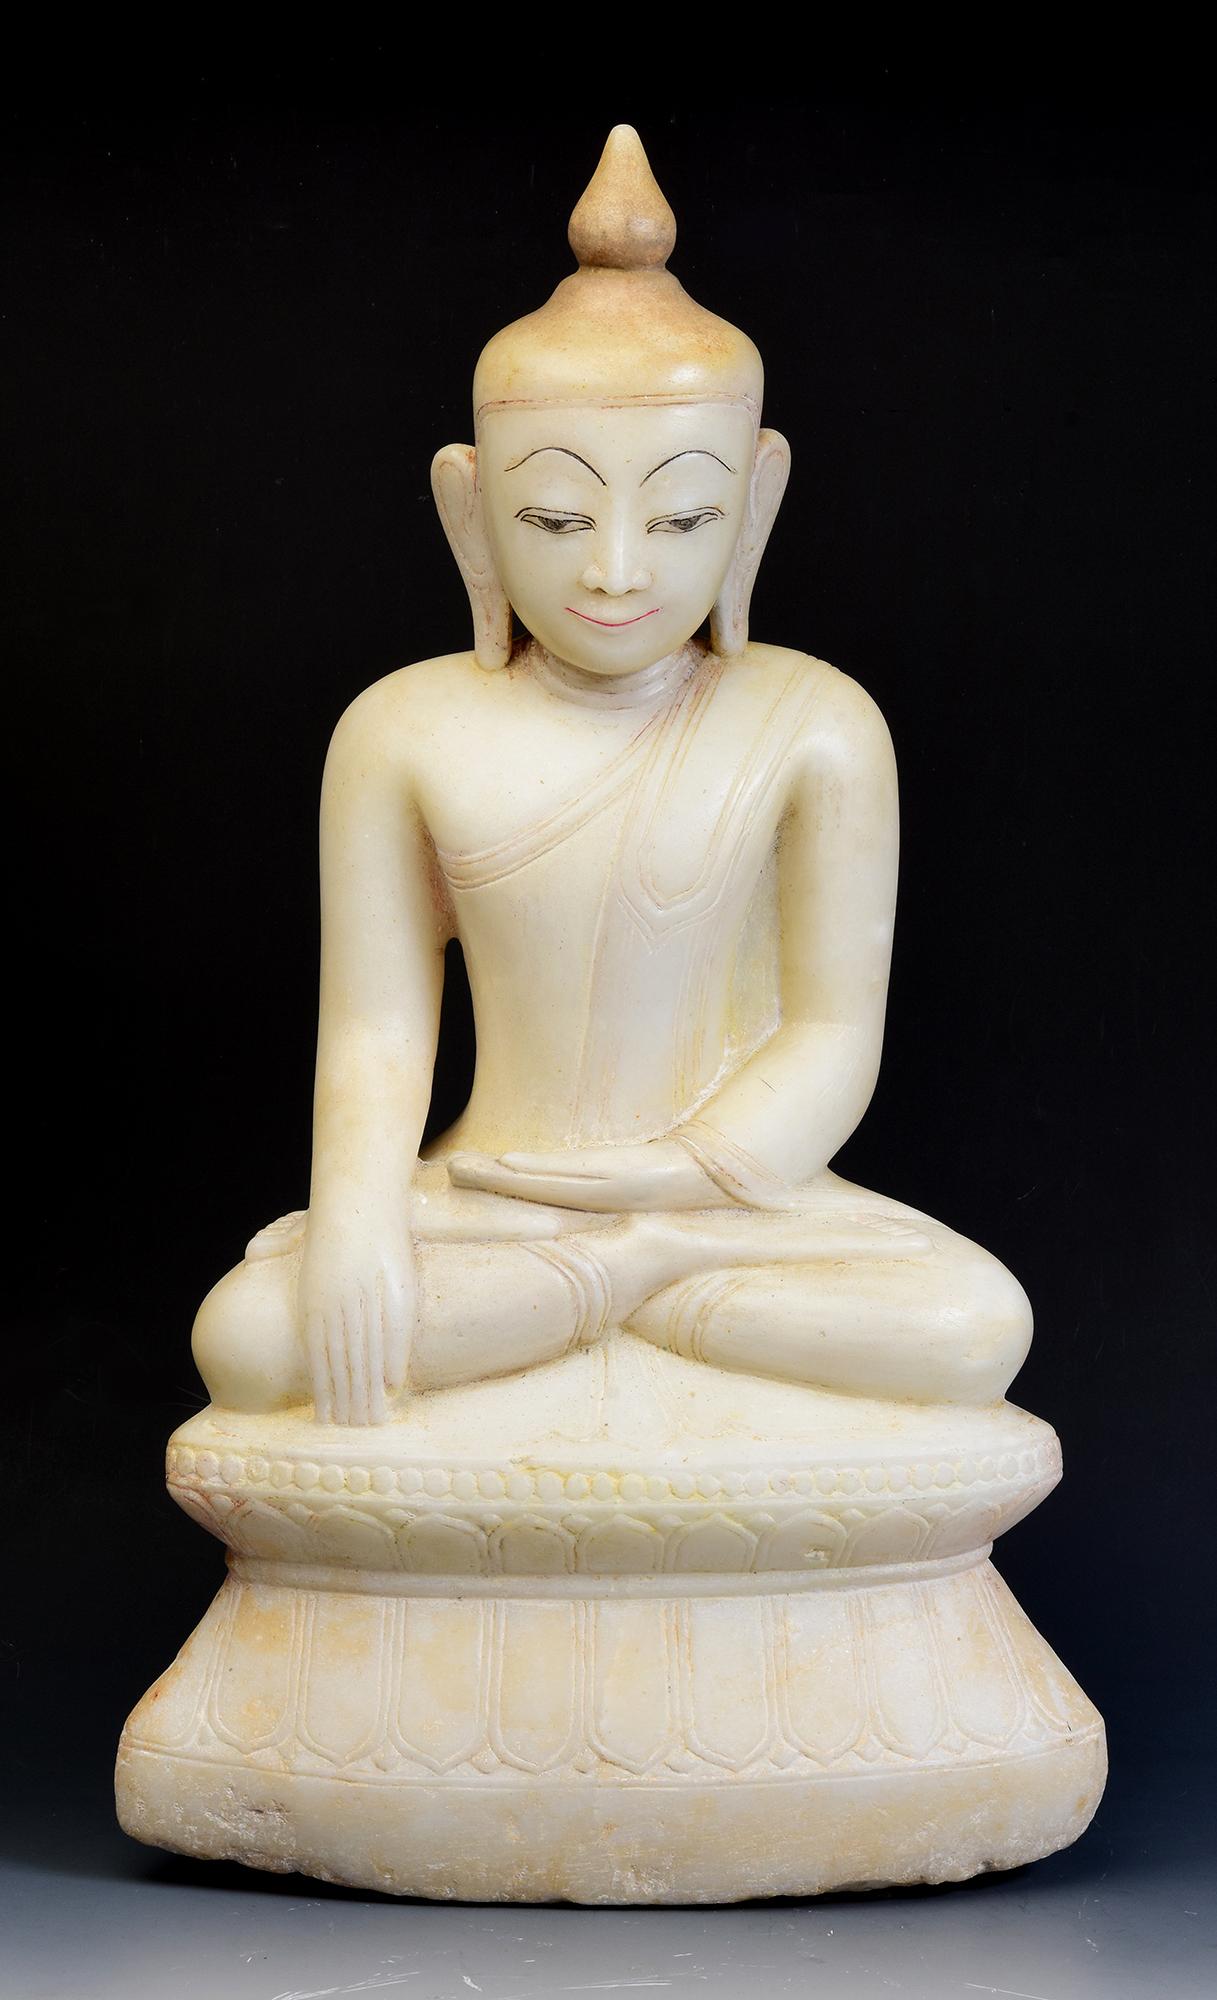 Antique Burmese alabaster Buddha sitting in Mara Vijaya (calling the earth to witness) posture on double lotus base.

Age: Burma, Shan Period, 18th Century
Size: Height 54.8 C.M. / Width 31.4 C.M. / Depth 16.5 C.M.
Condition: Nice condition overall